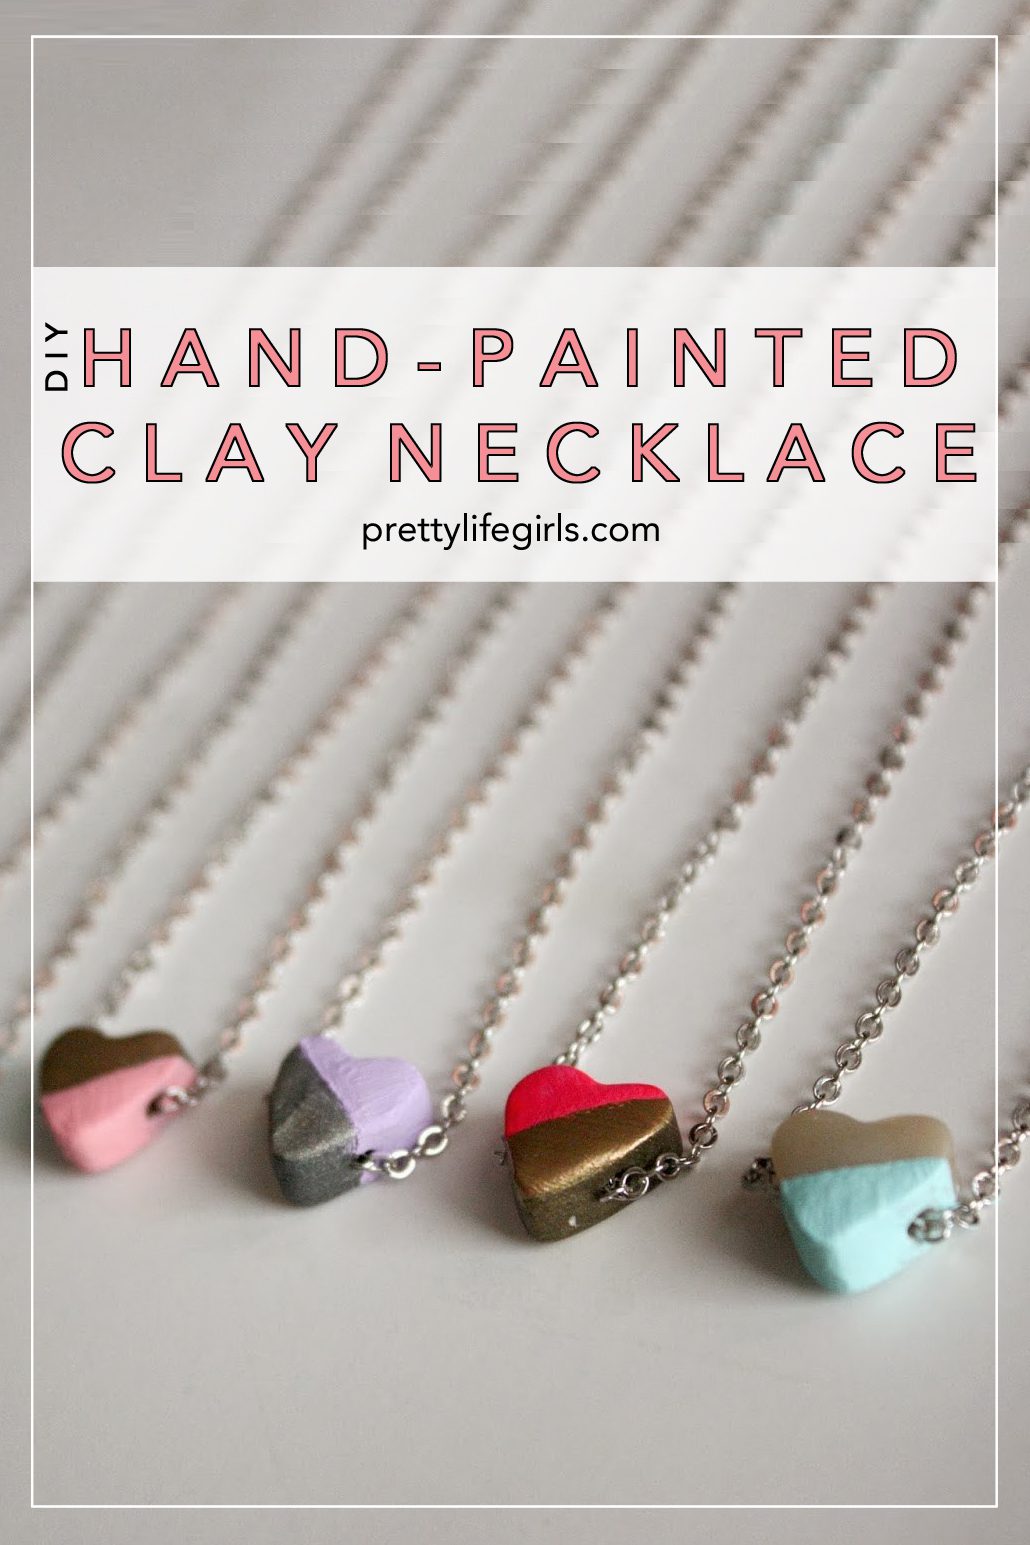 15 Lovely Handmade Valentine Gifts + featured by Top US Craft Blog + The Pretty Life Girls: + DIY Hand-Painted Clay Heart Necklaces